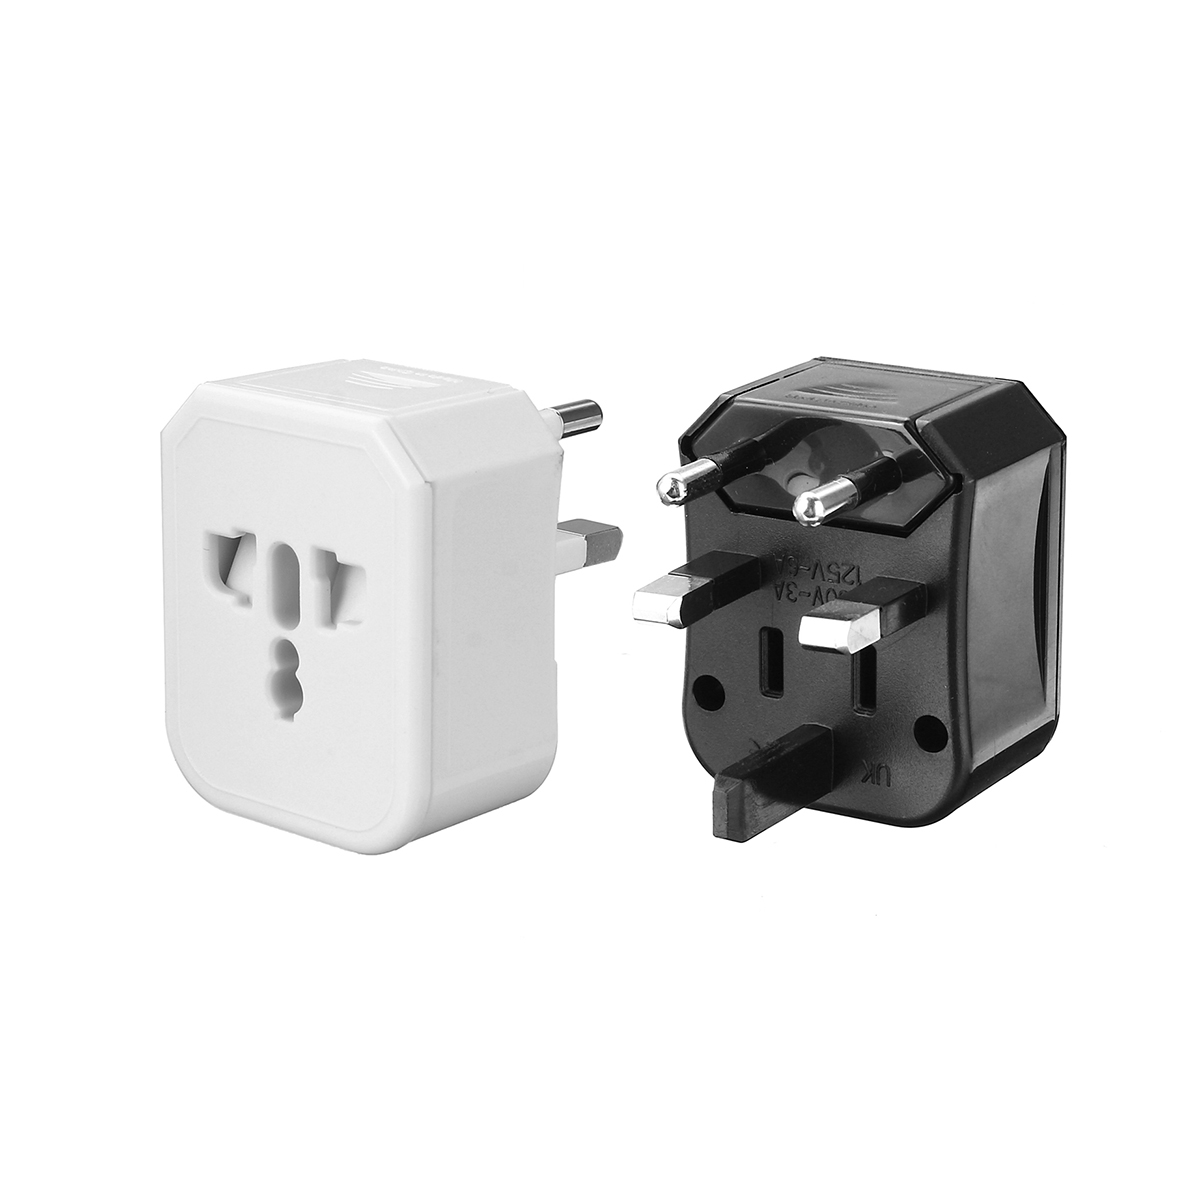 Travel-Adapter-Universal-Power-Adapter-with-2-USB-Ports-Wall-Charger-AC-Power-Plug-1304296-5